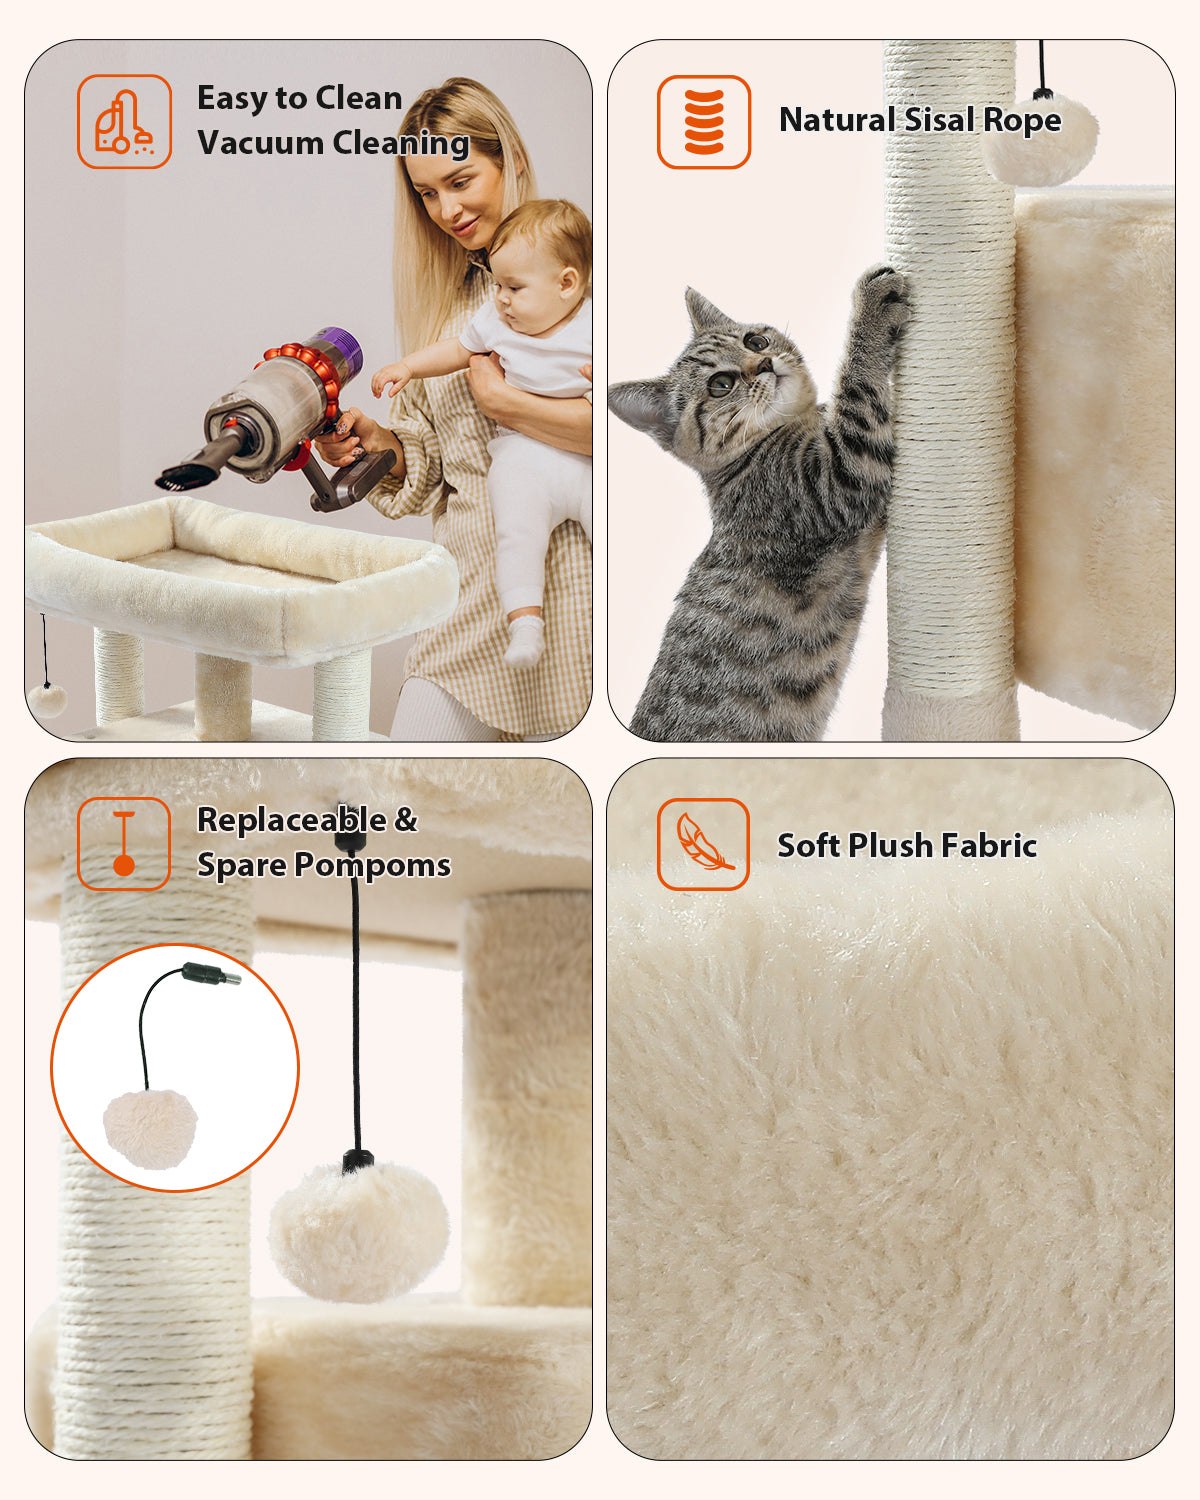 PAWZ Road Cat Tree Scratching Post Scratcher Tower Condo House Furniture Bed 72cm Beige